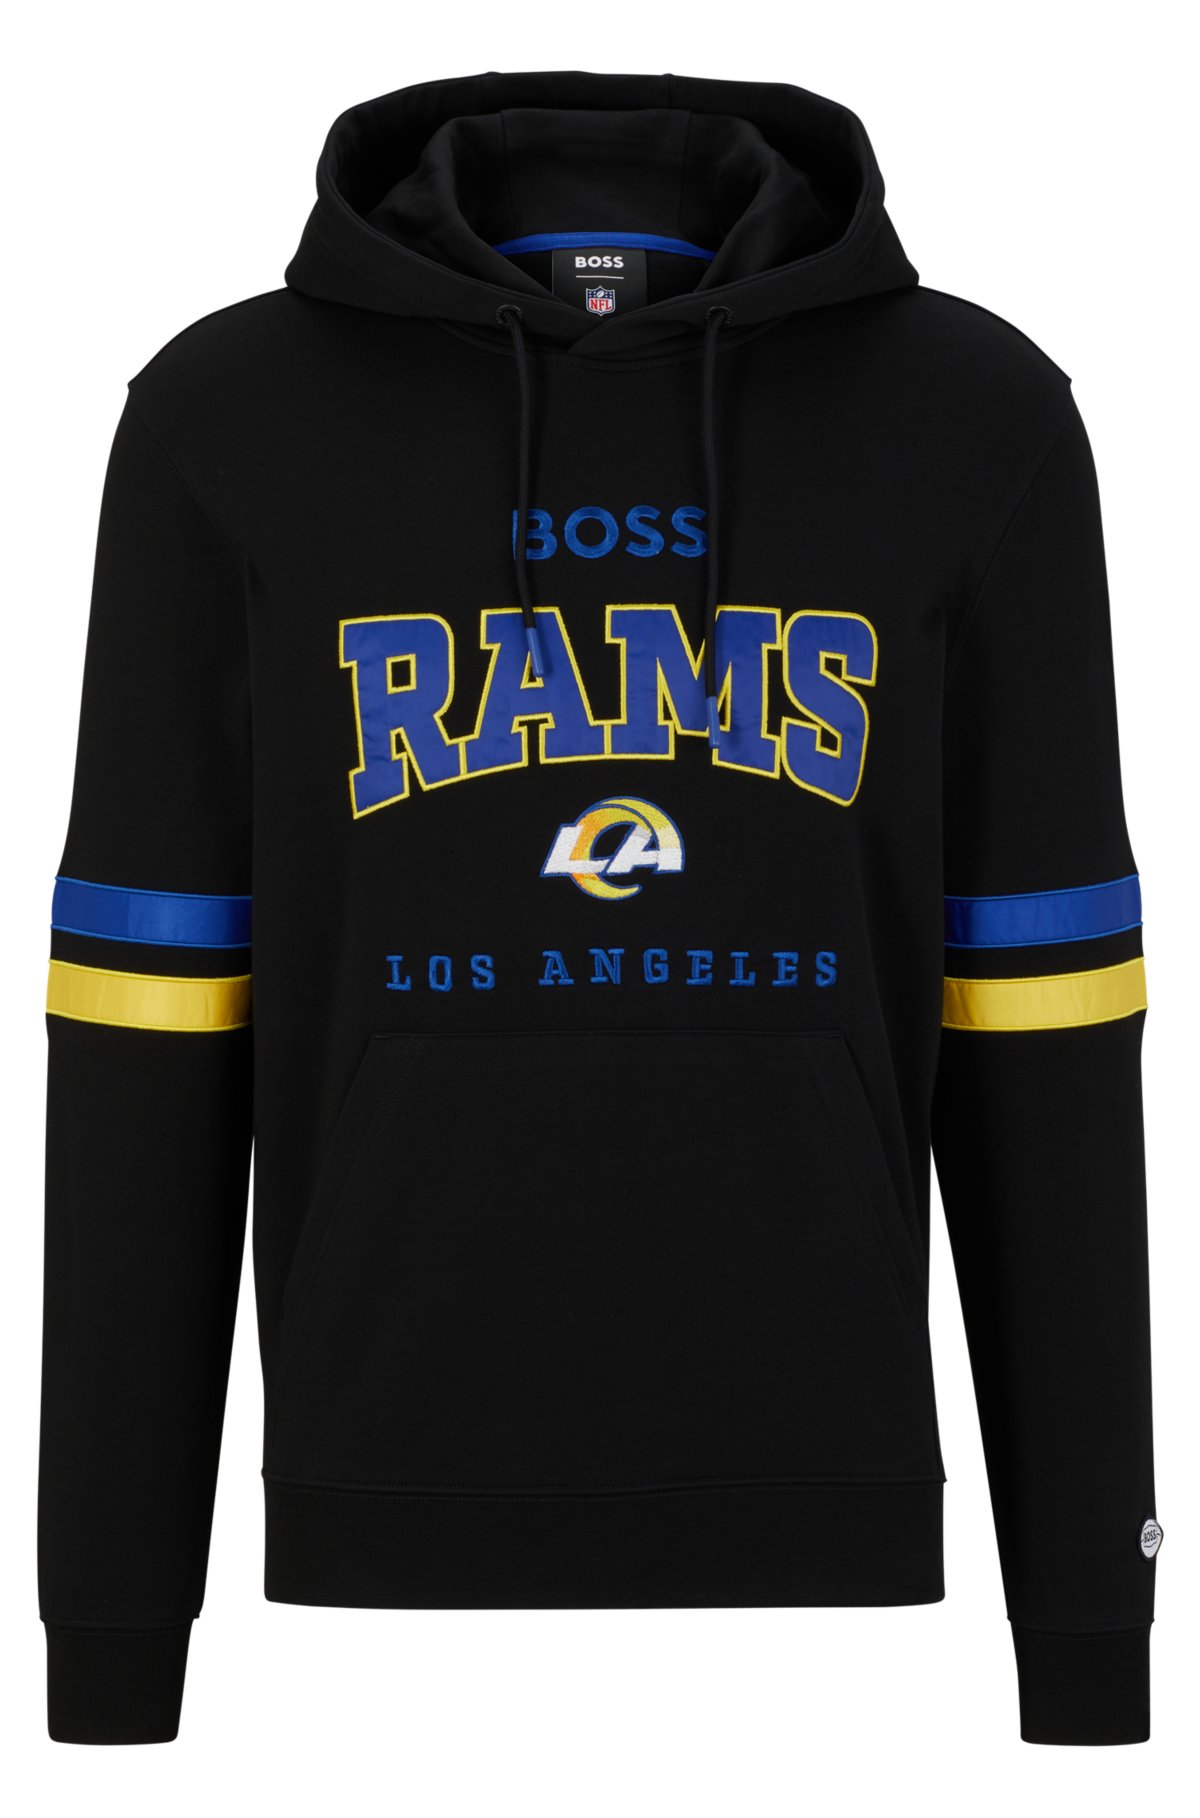 Boss Men's NFL Rams Pullover Hoodie - Black - Size Small